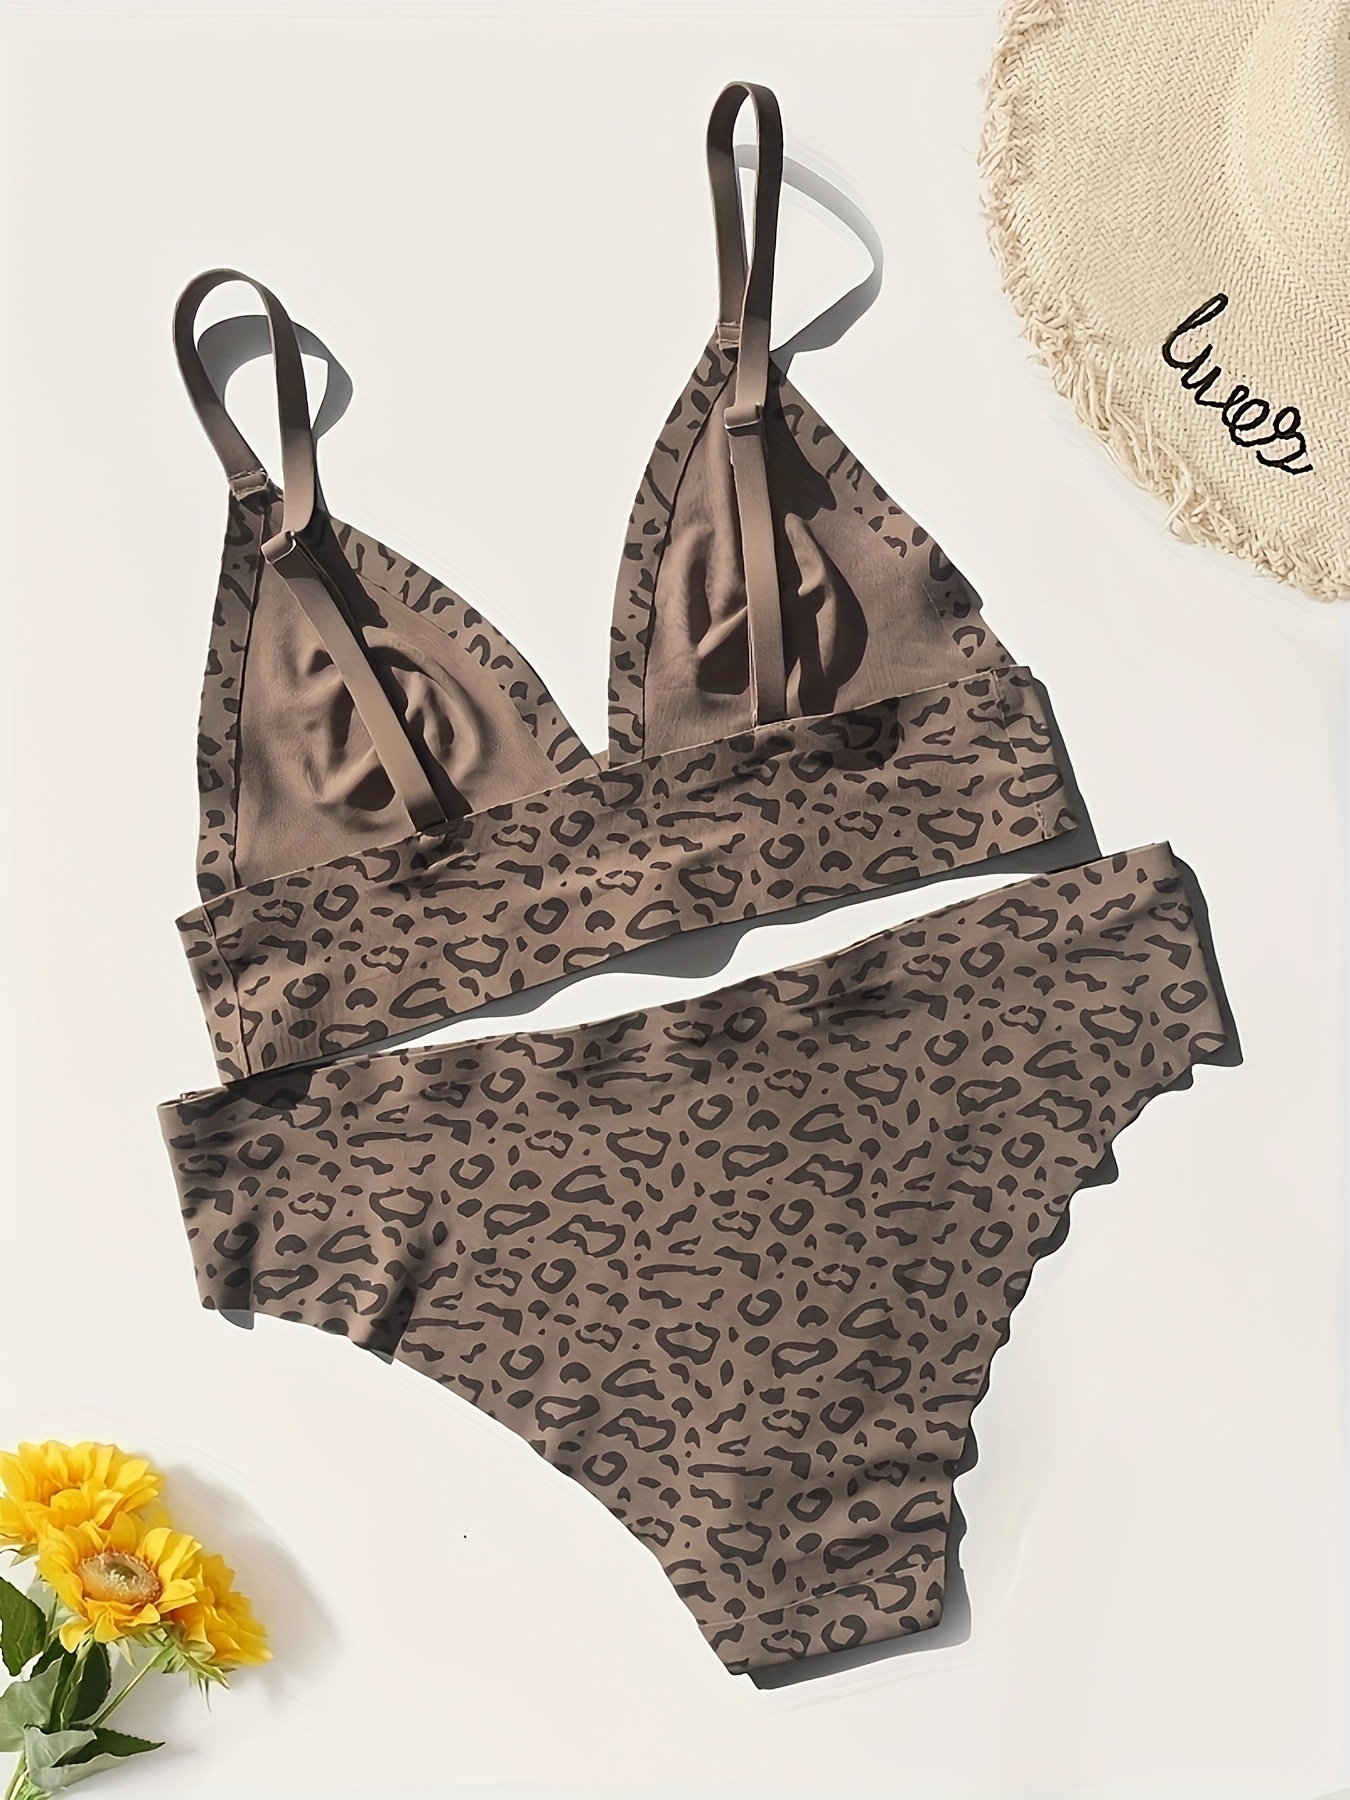 Comfortable Stylish leopard print panty and bra sets Deals 